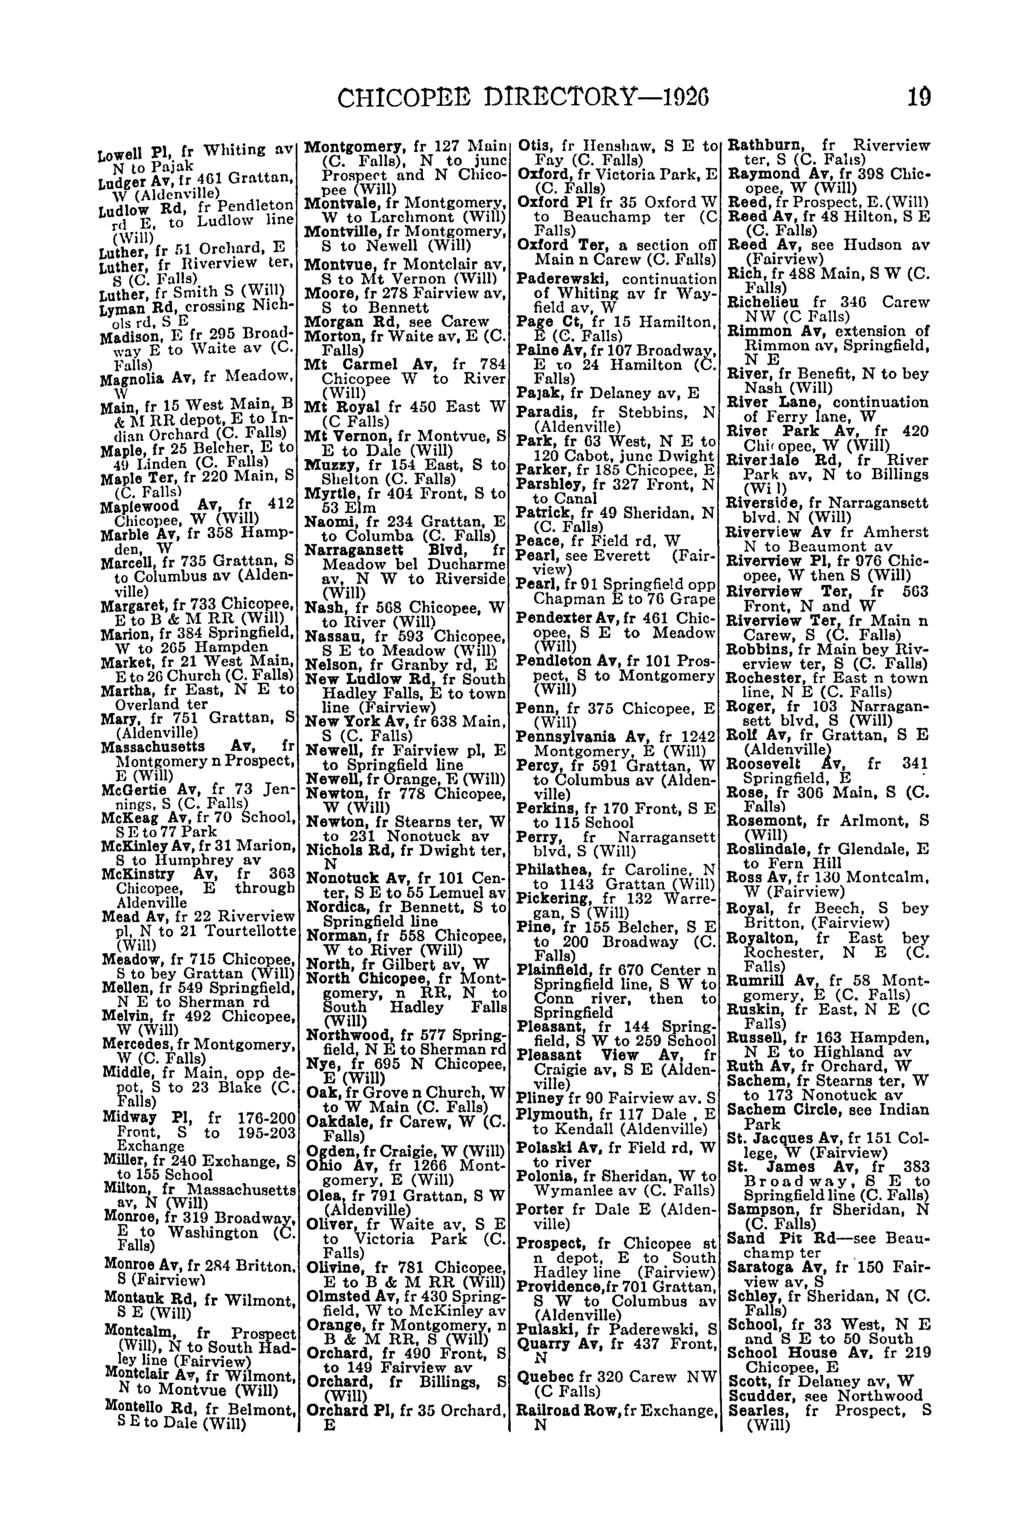 CHICOPEE DIRECTORY-1926 19 Lowell PI, Cr Whiting nv N to Pajak Ludger Av, fr 461 Grattan, W () Ludlow Rd, fr Pendle~on rel E, to Ludlow hne () Luther, fr 51.